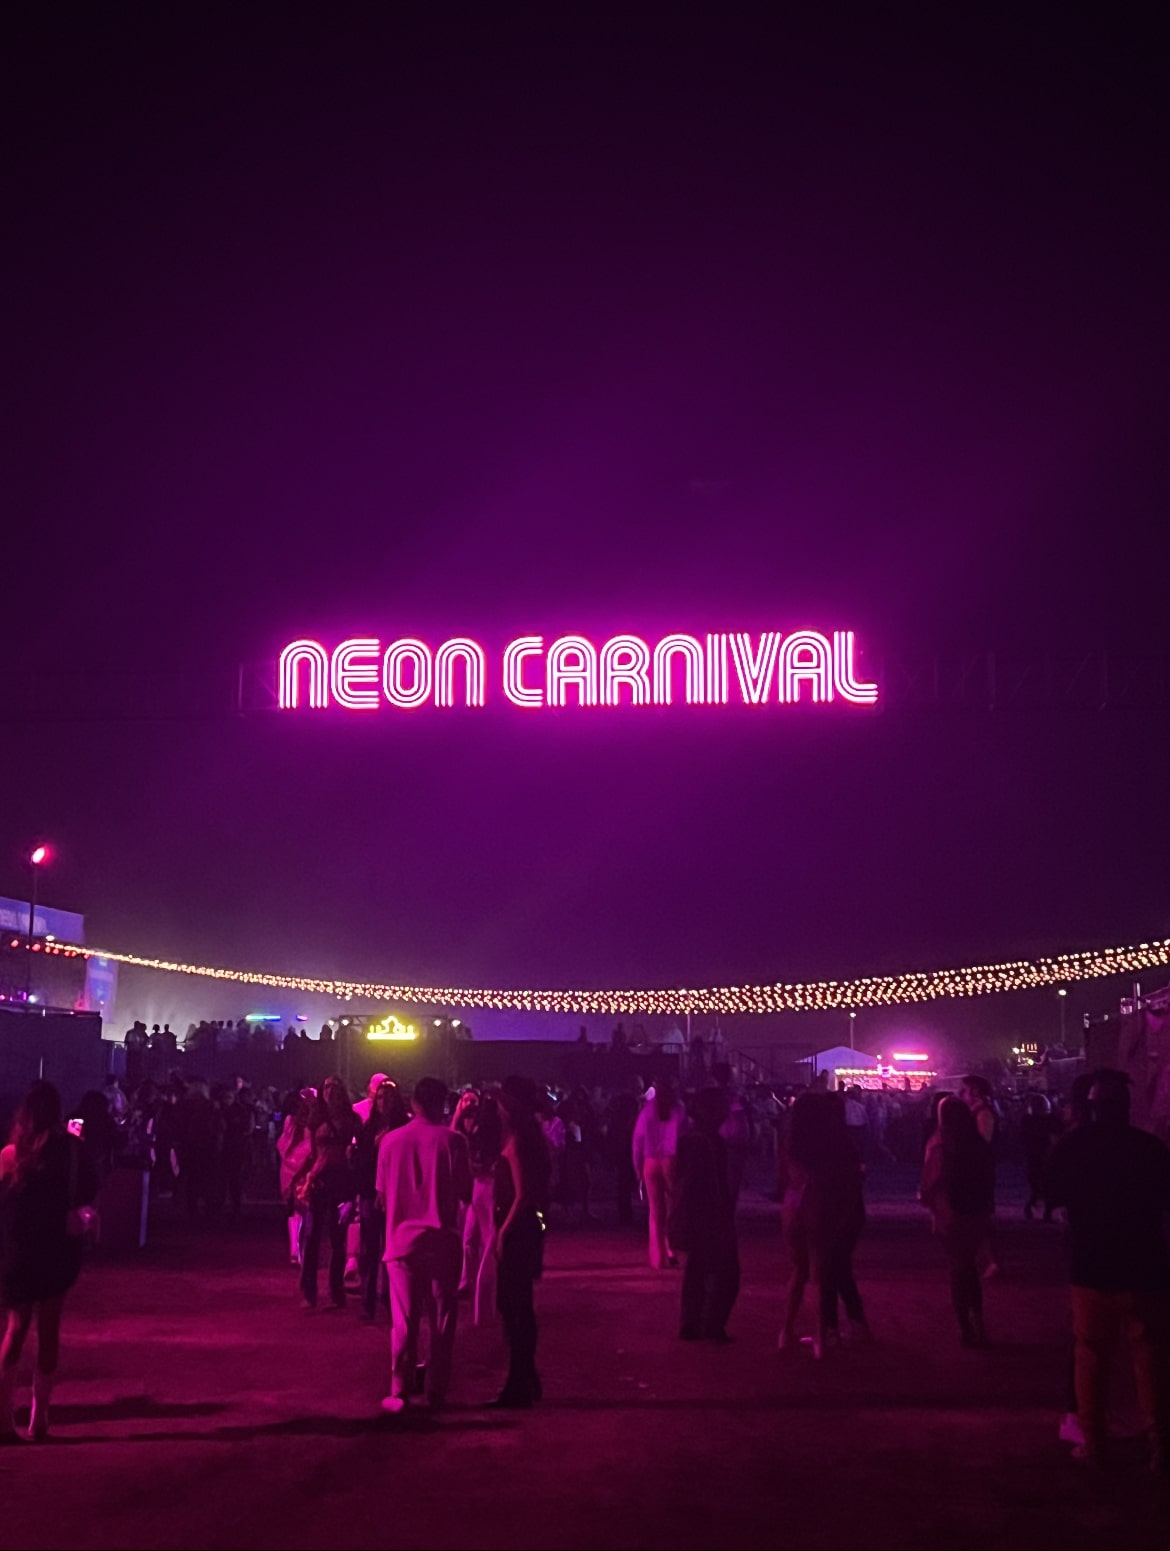 Neon pink sign suspended over crowd of people that reads "Neon Carnival"